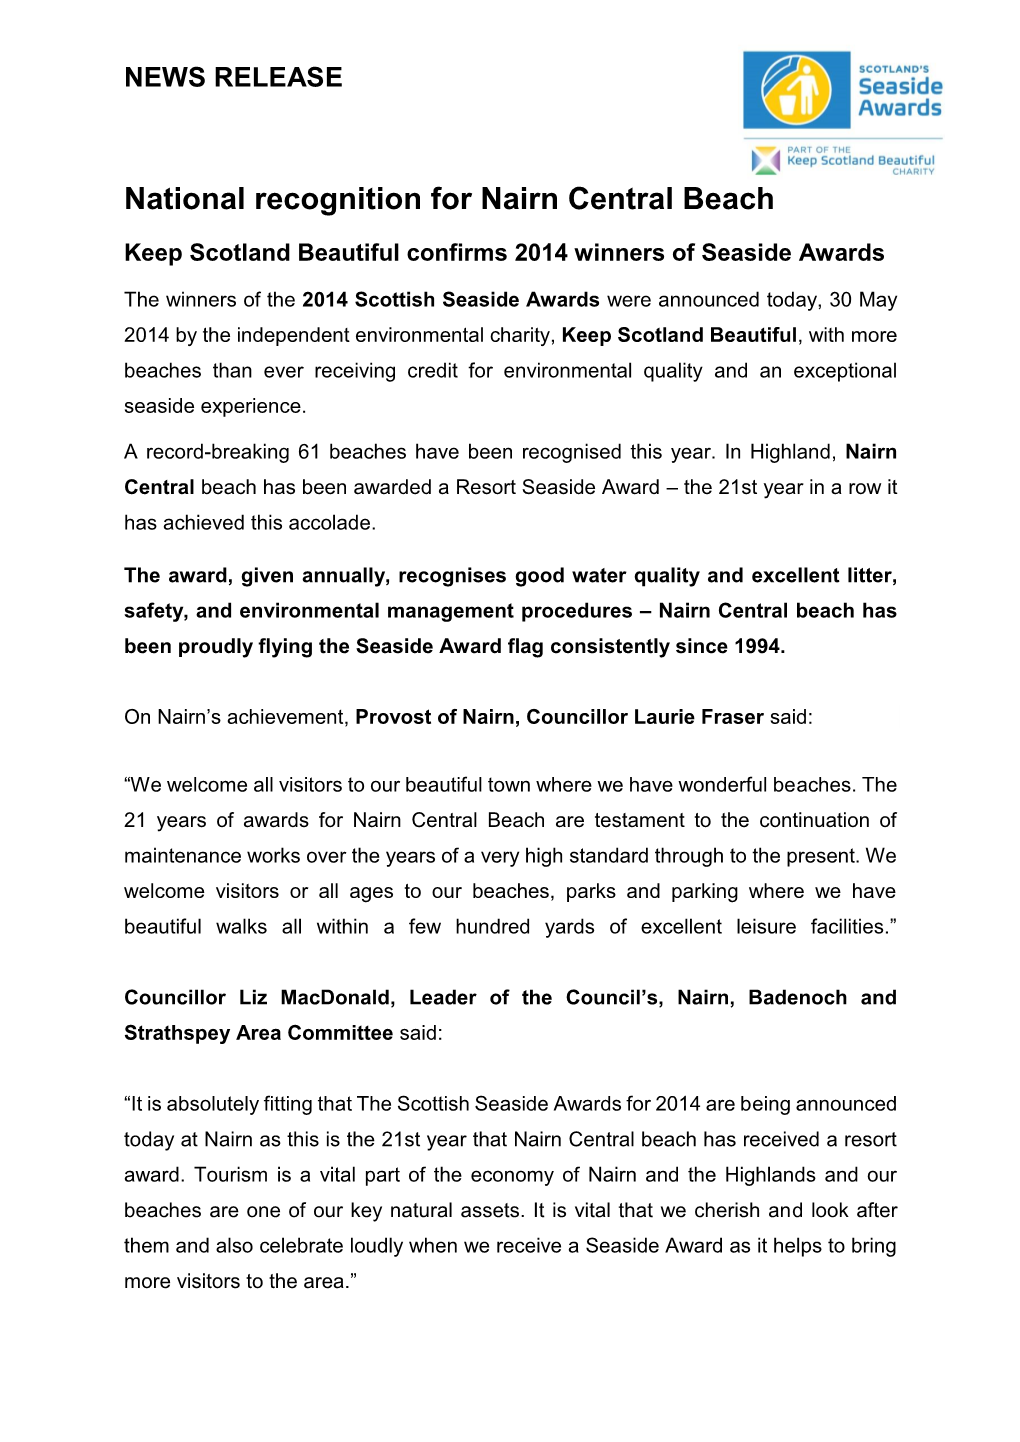 National Recognition for Nairn Central Beach